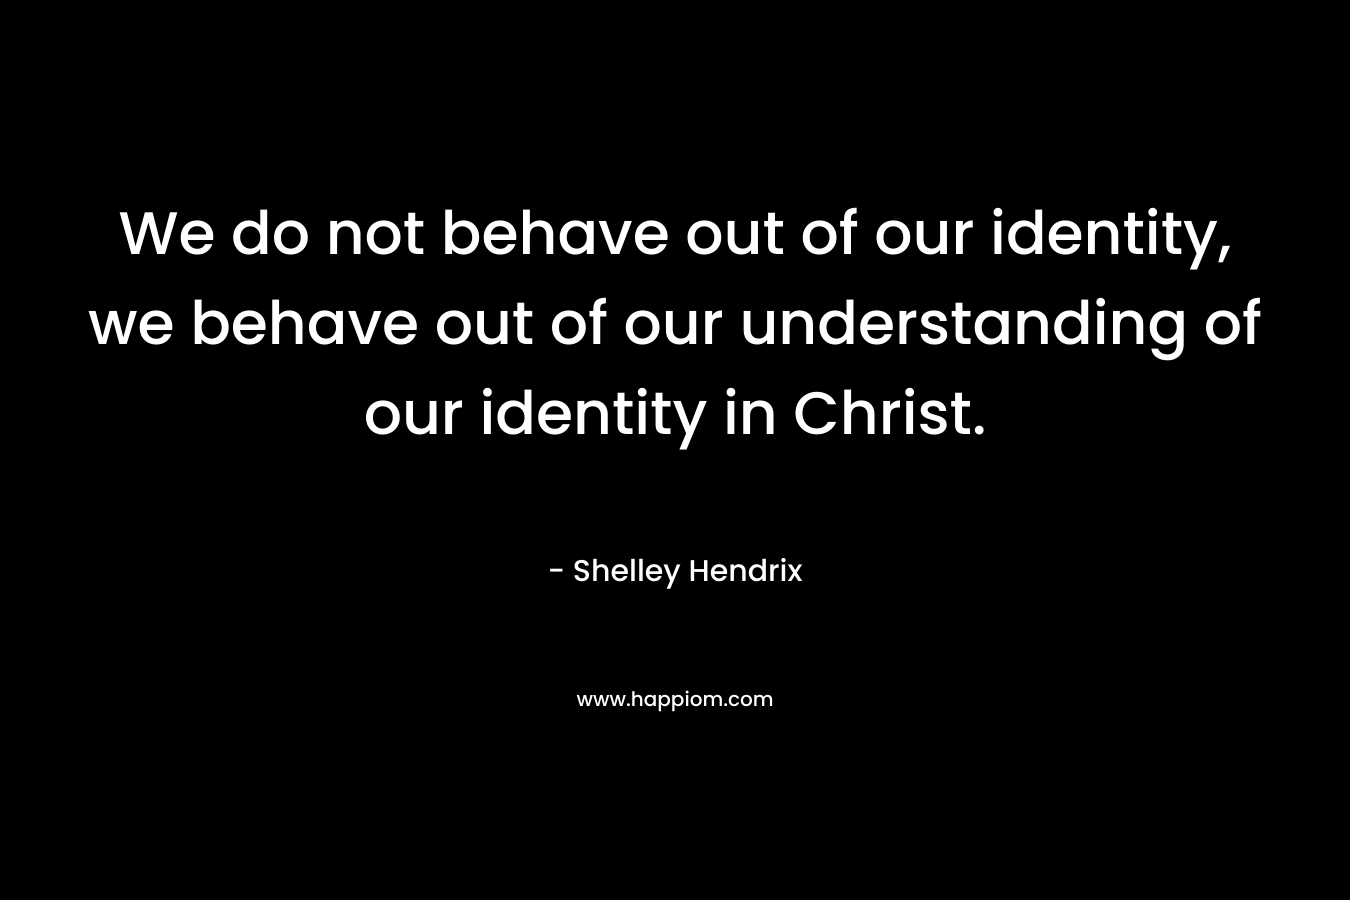 We do not behave out of our identity, we behave out of our understanding of our identity in Christ. – Shelley Hendrix